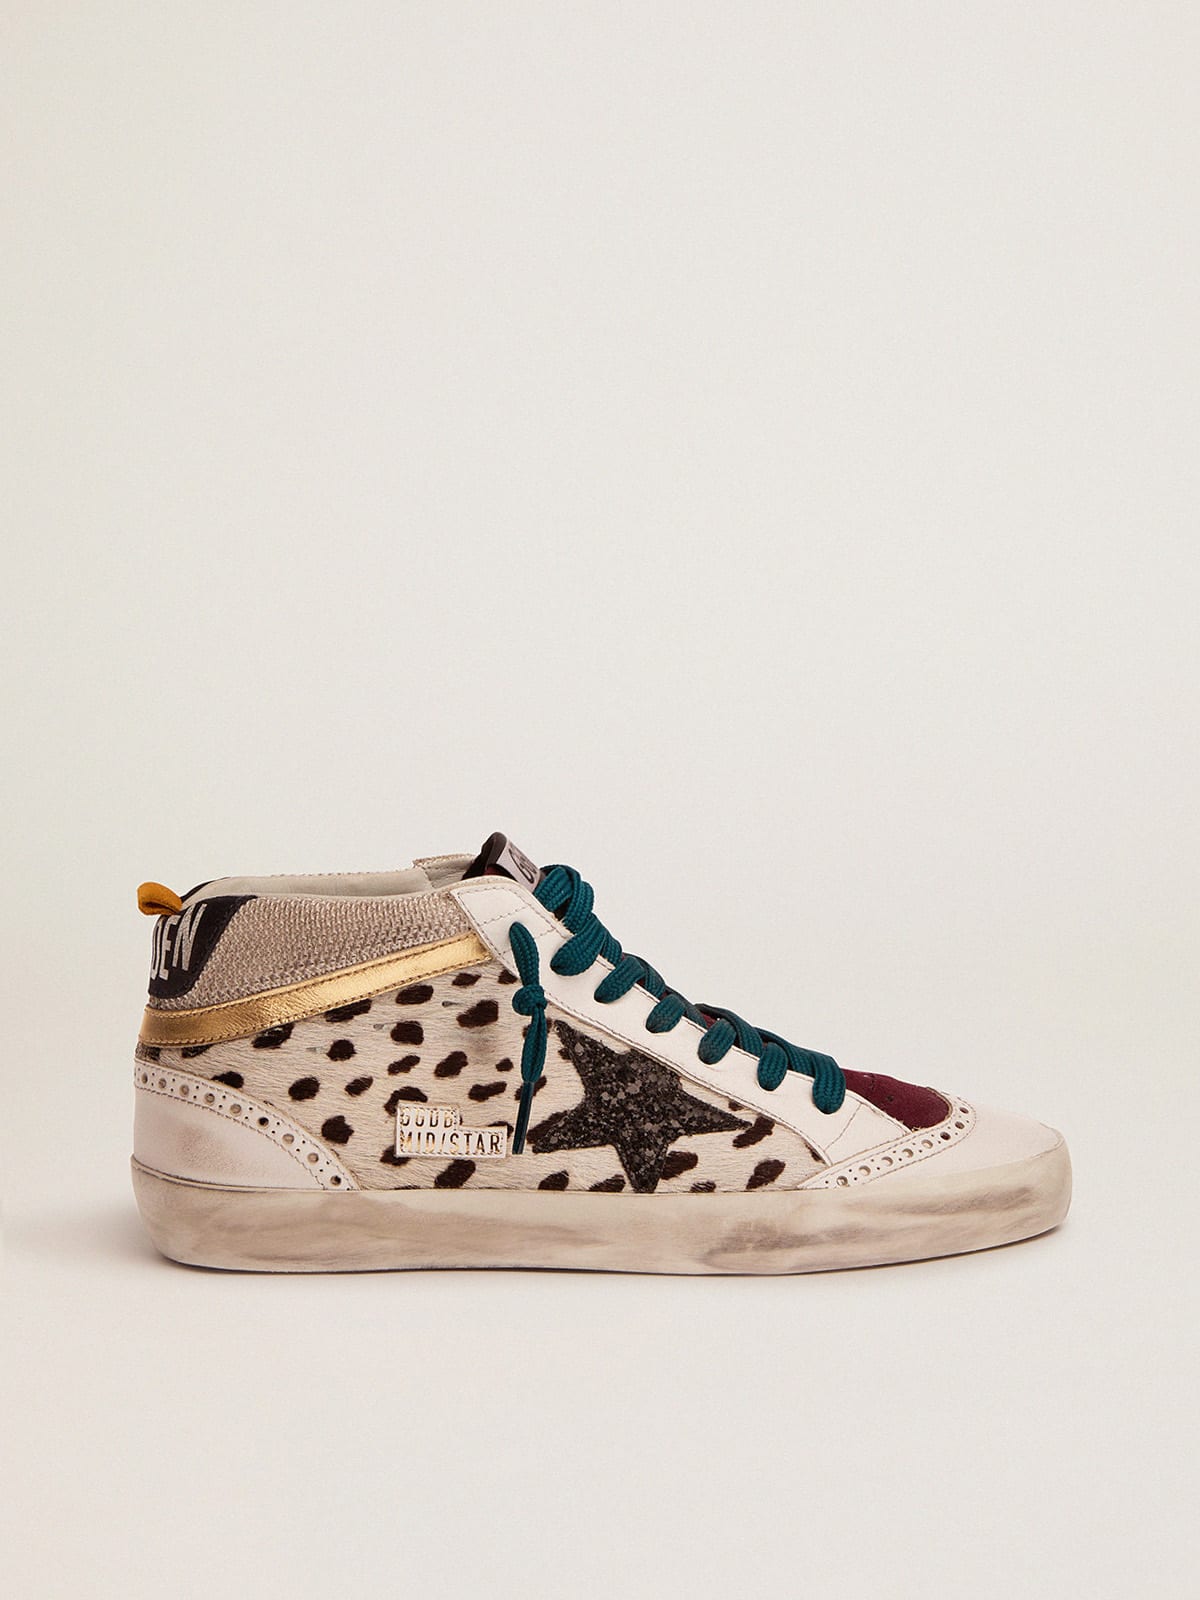 Mid Star sneakers with animal-print pony skin upper and glitter star |  Golden Goose